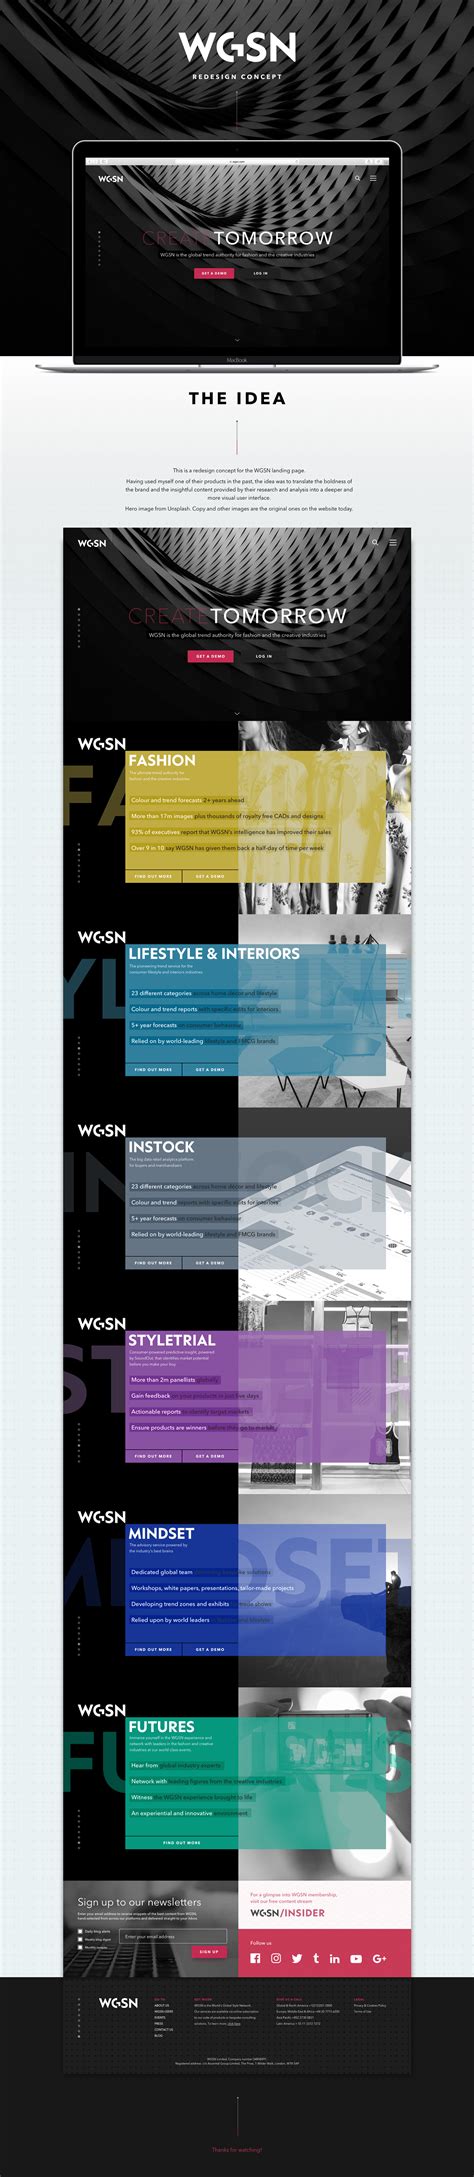 wgsn-redesign-concept-on-behance-concept,-redesign,-web